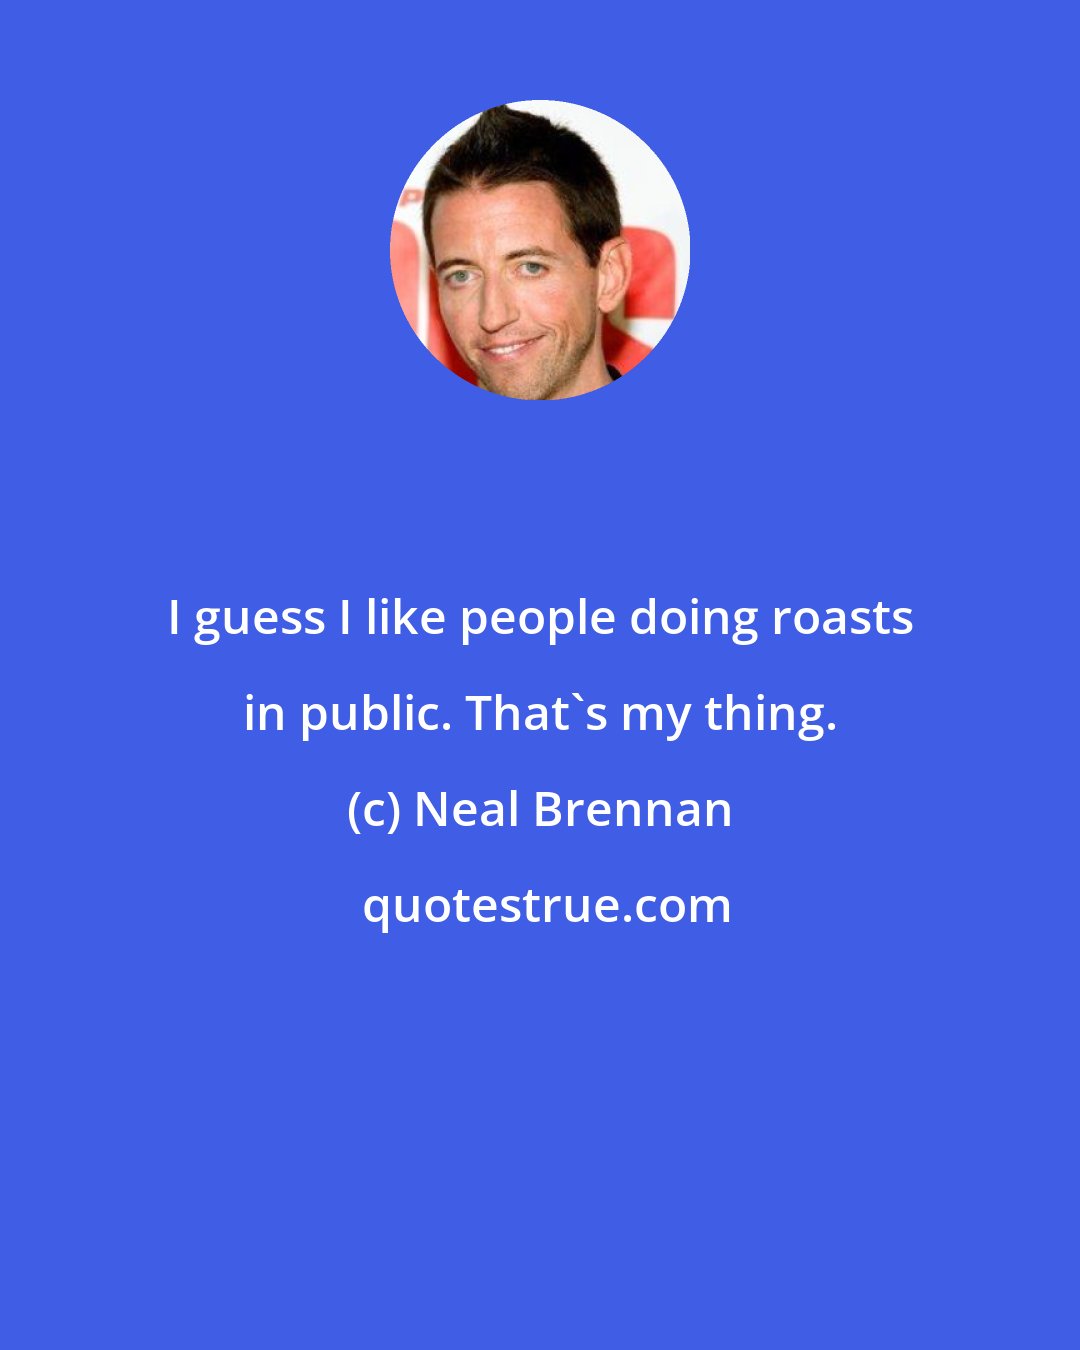 Neal Brennan: I guess I like people doing roasts in public. That's my thing.